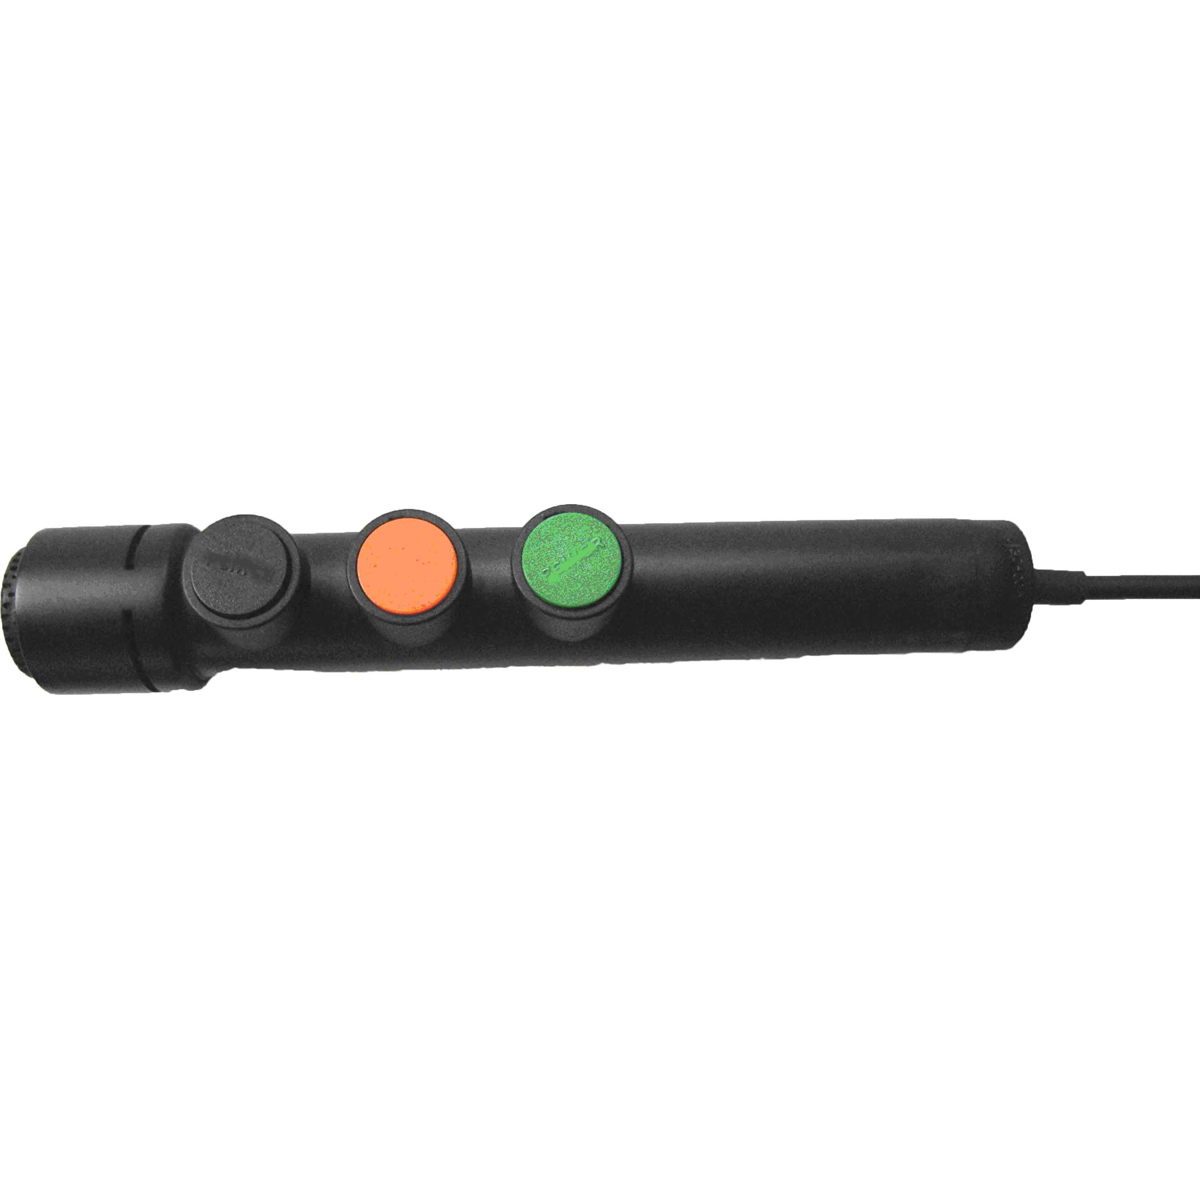 Hand-held microphone for INDUSTRONIC digital stations ot the DA 104, DA114 and DAE 0x5 series